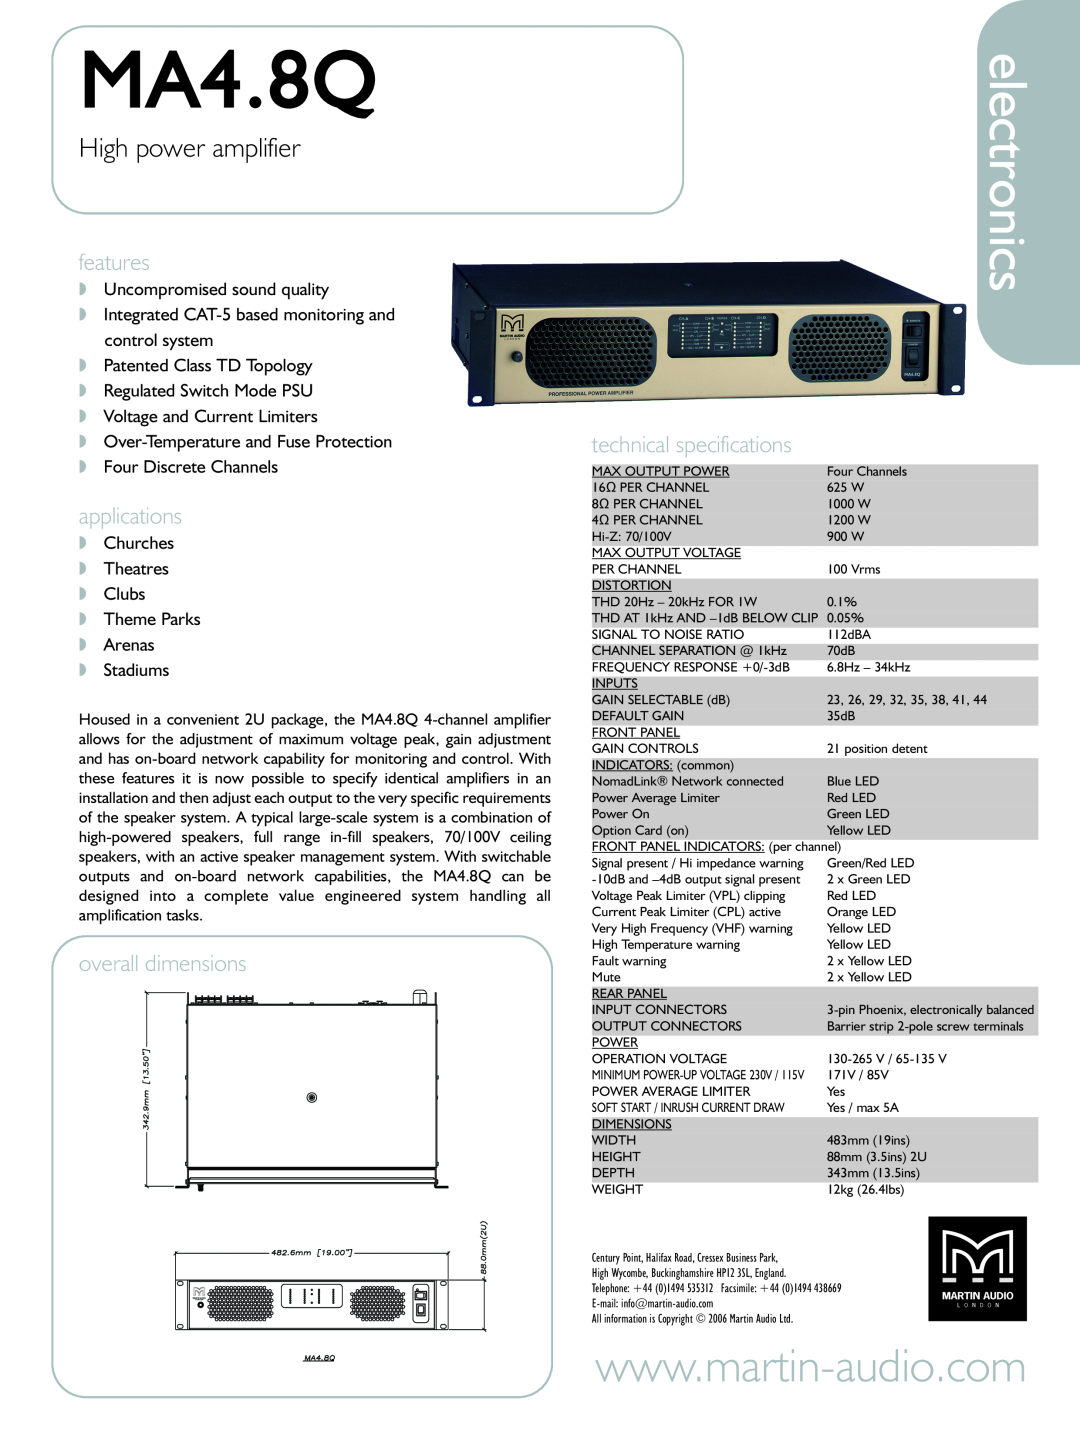 Martin Audio MA4.8Q technical specifications electronics, High power amplifier, features, applications, overall dimensions 